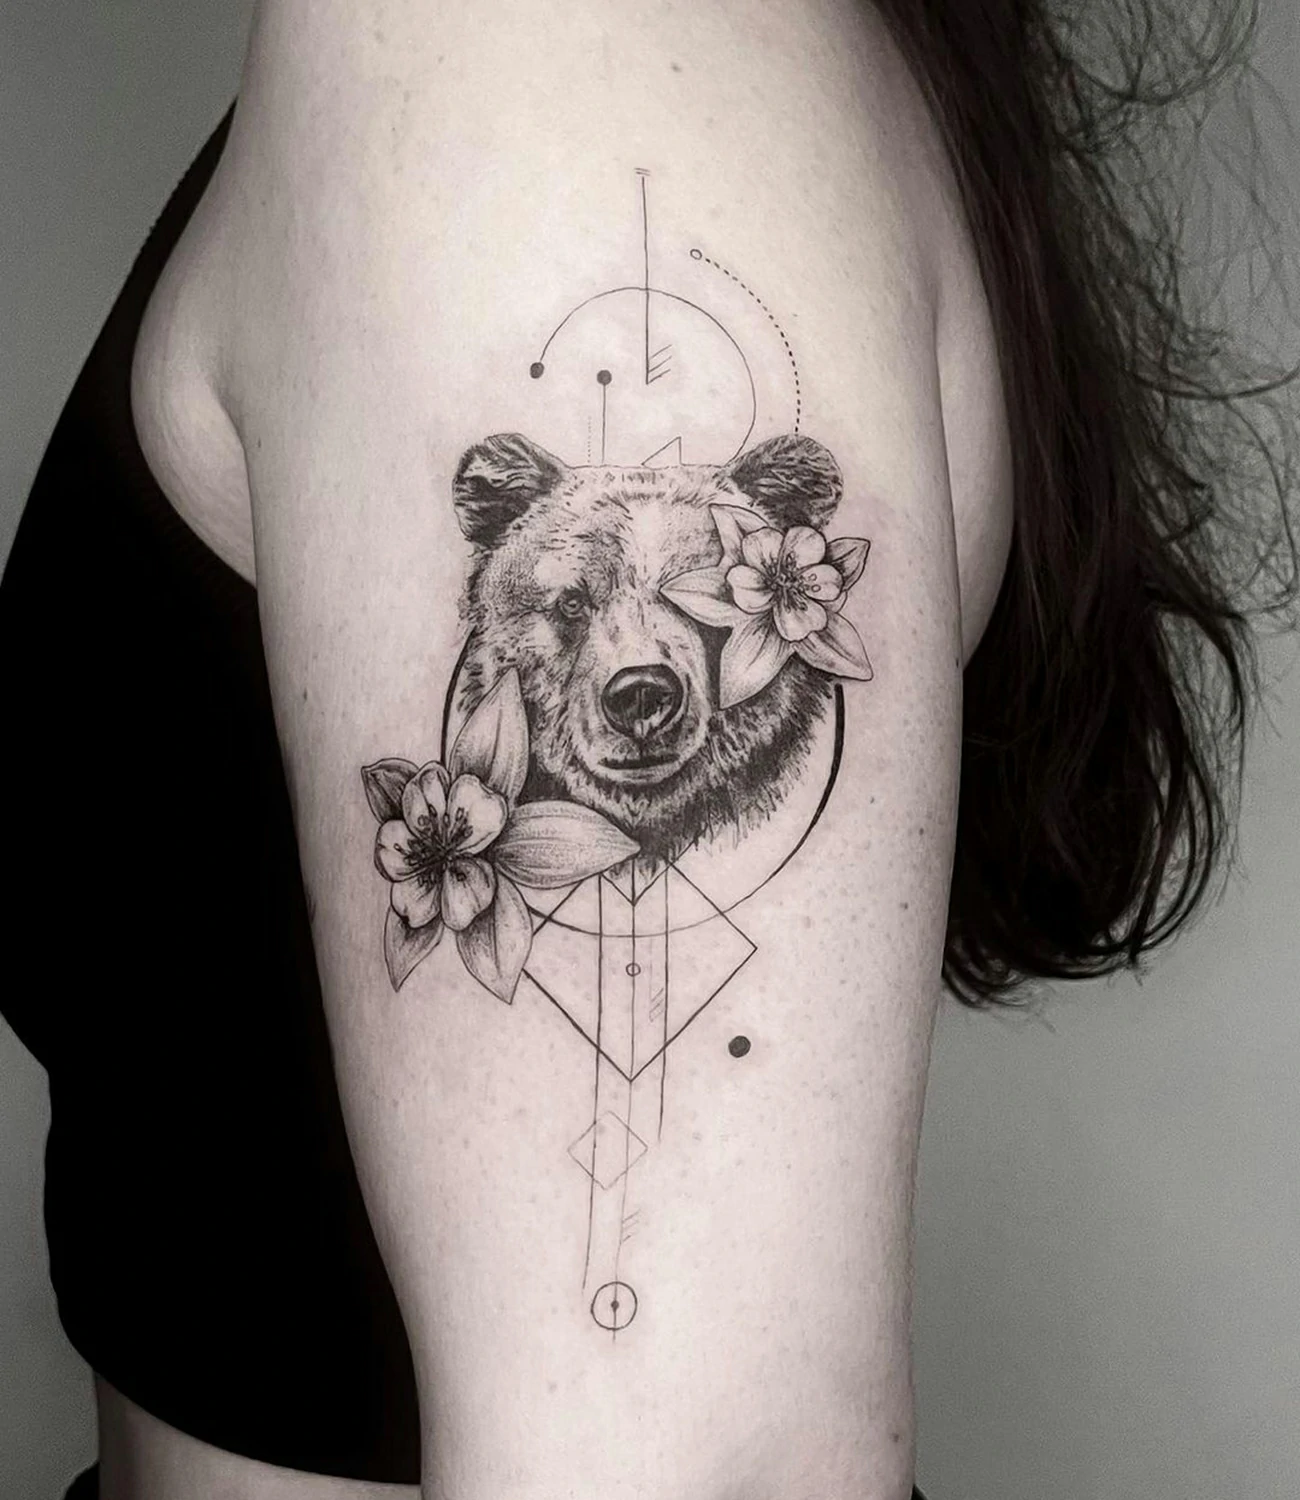 Geometric Bear Tattoo: Geometric bear tattoos blend the powerful image of a bear with geometric shapes, symbolizing strength and courage